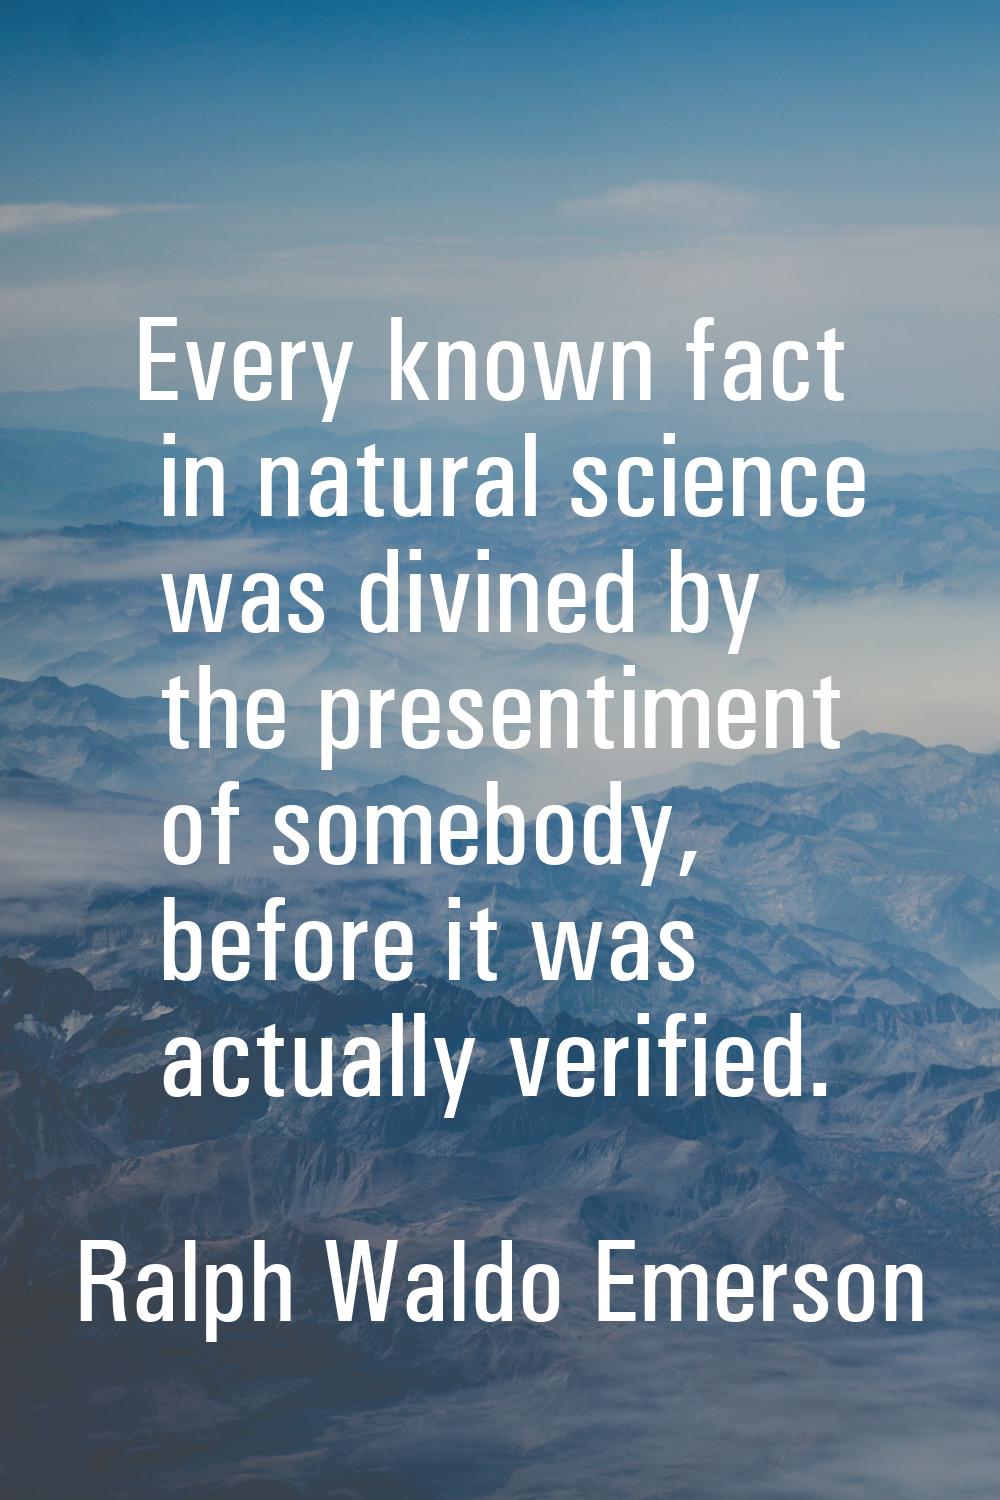 Every known fact in natural science was divined by the presentiment of somebody, before it was actu